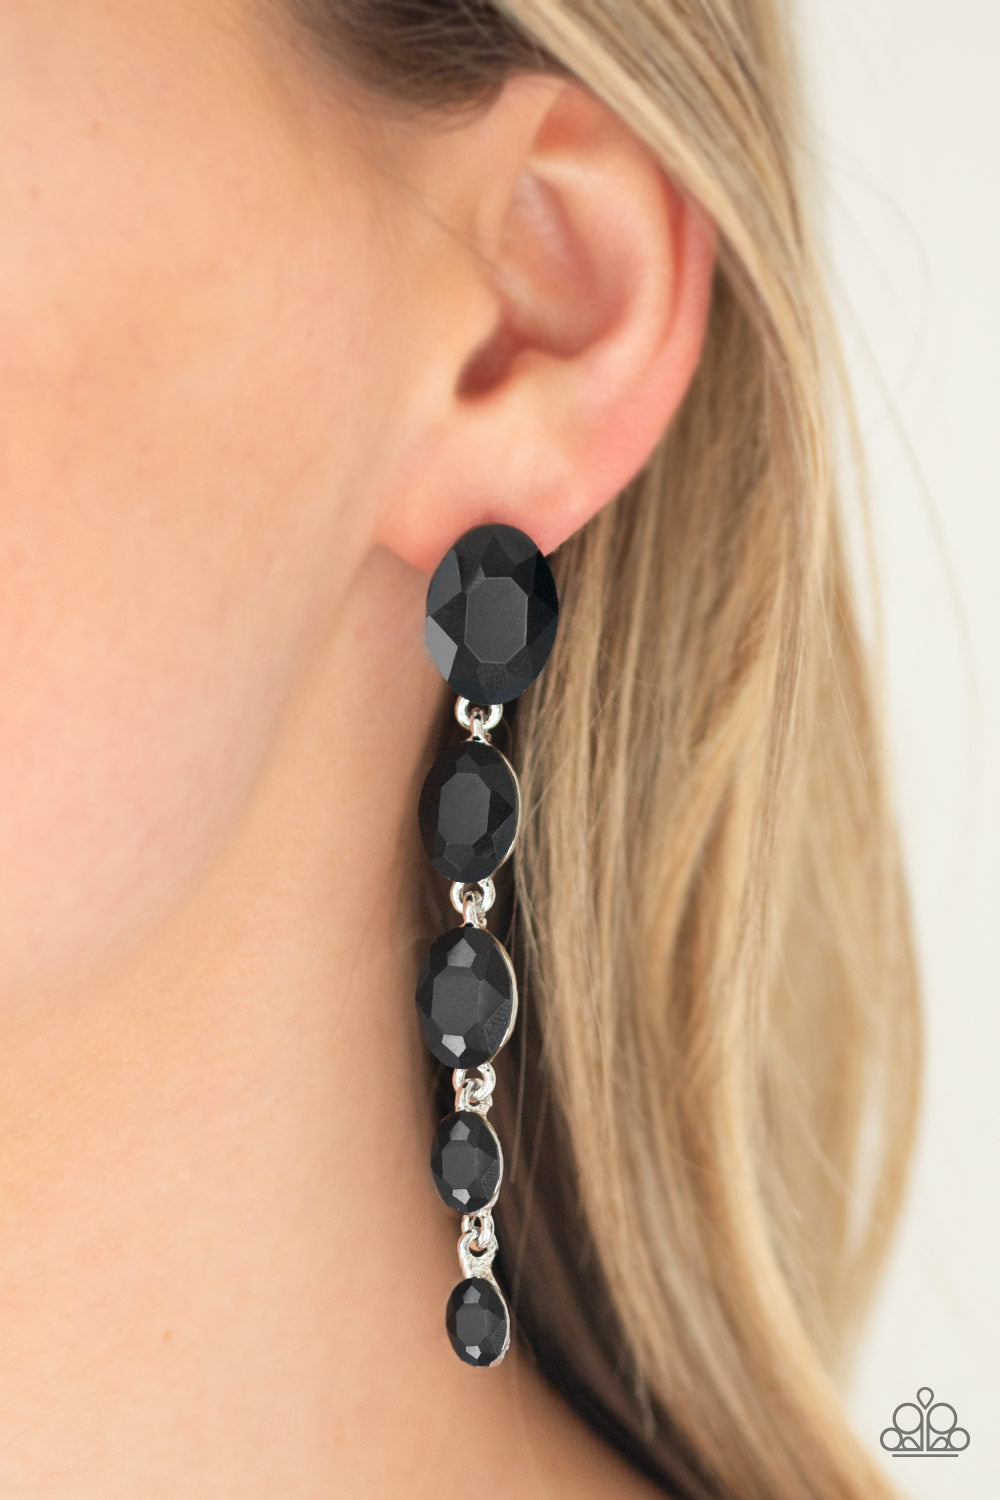 Red Carpet Radiance - Black - Earrings - Paparazzi Accessories